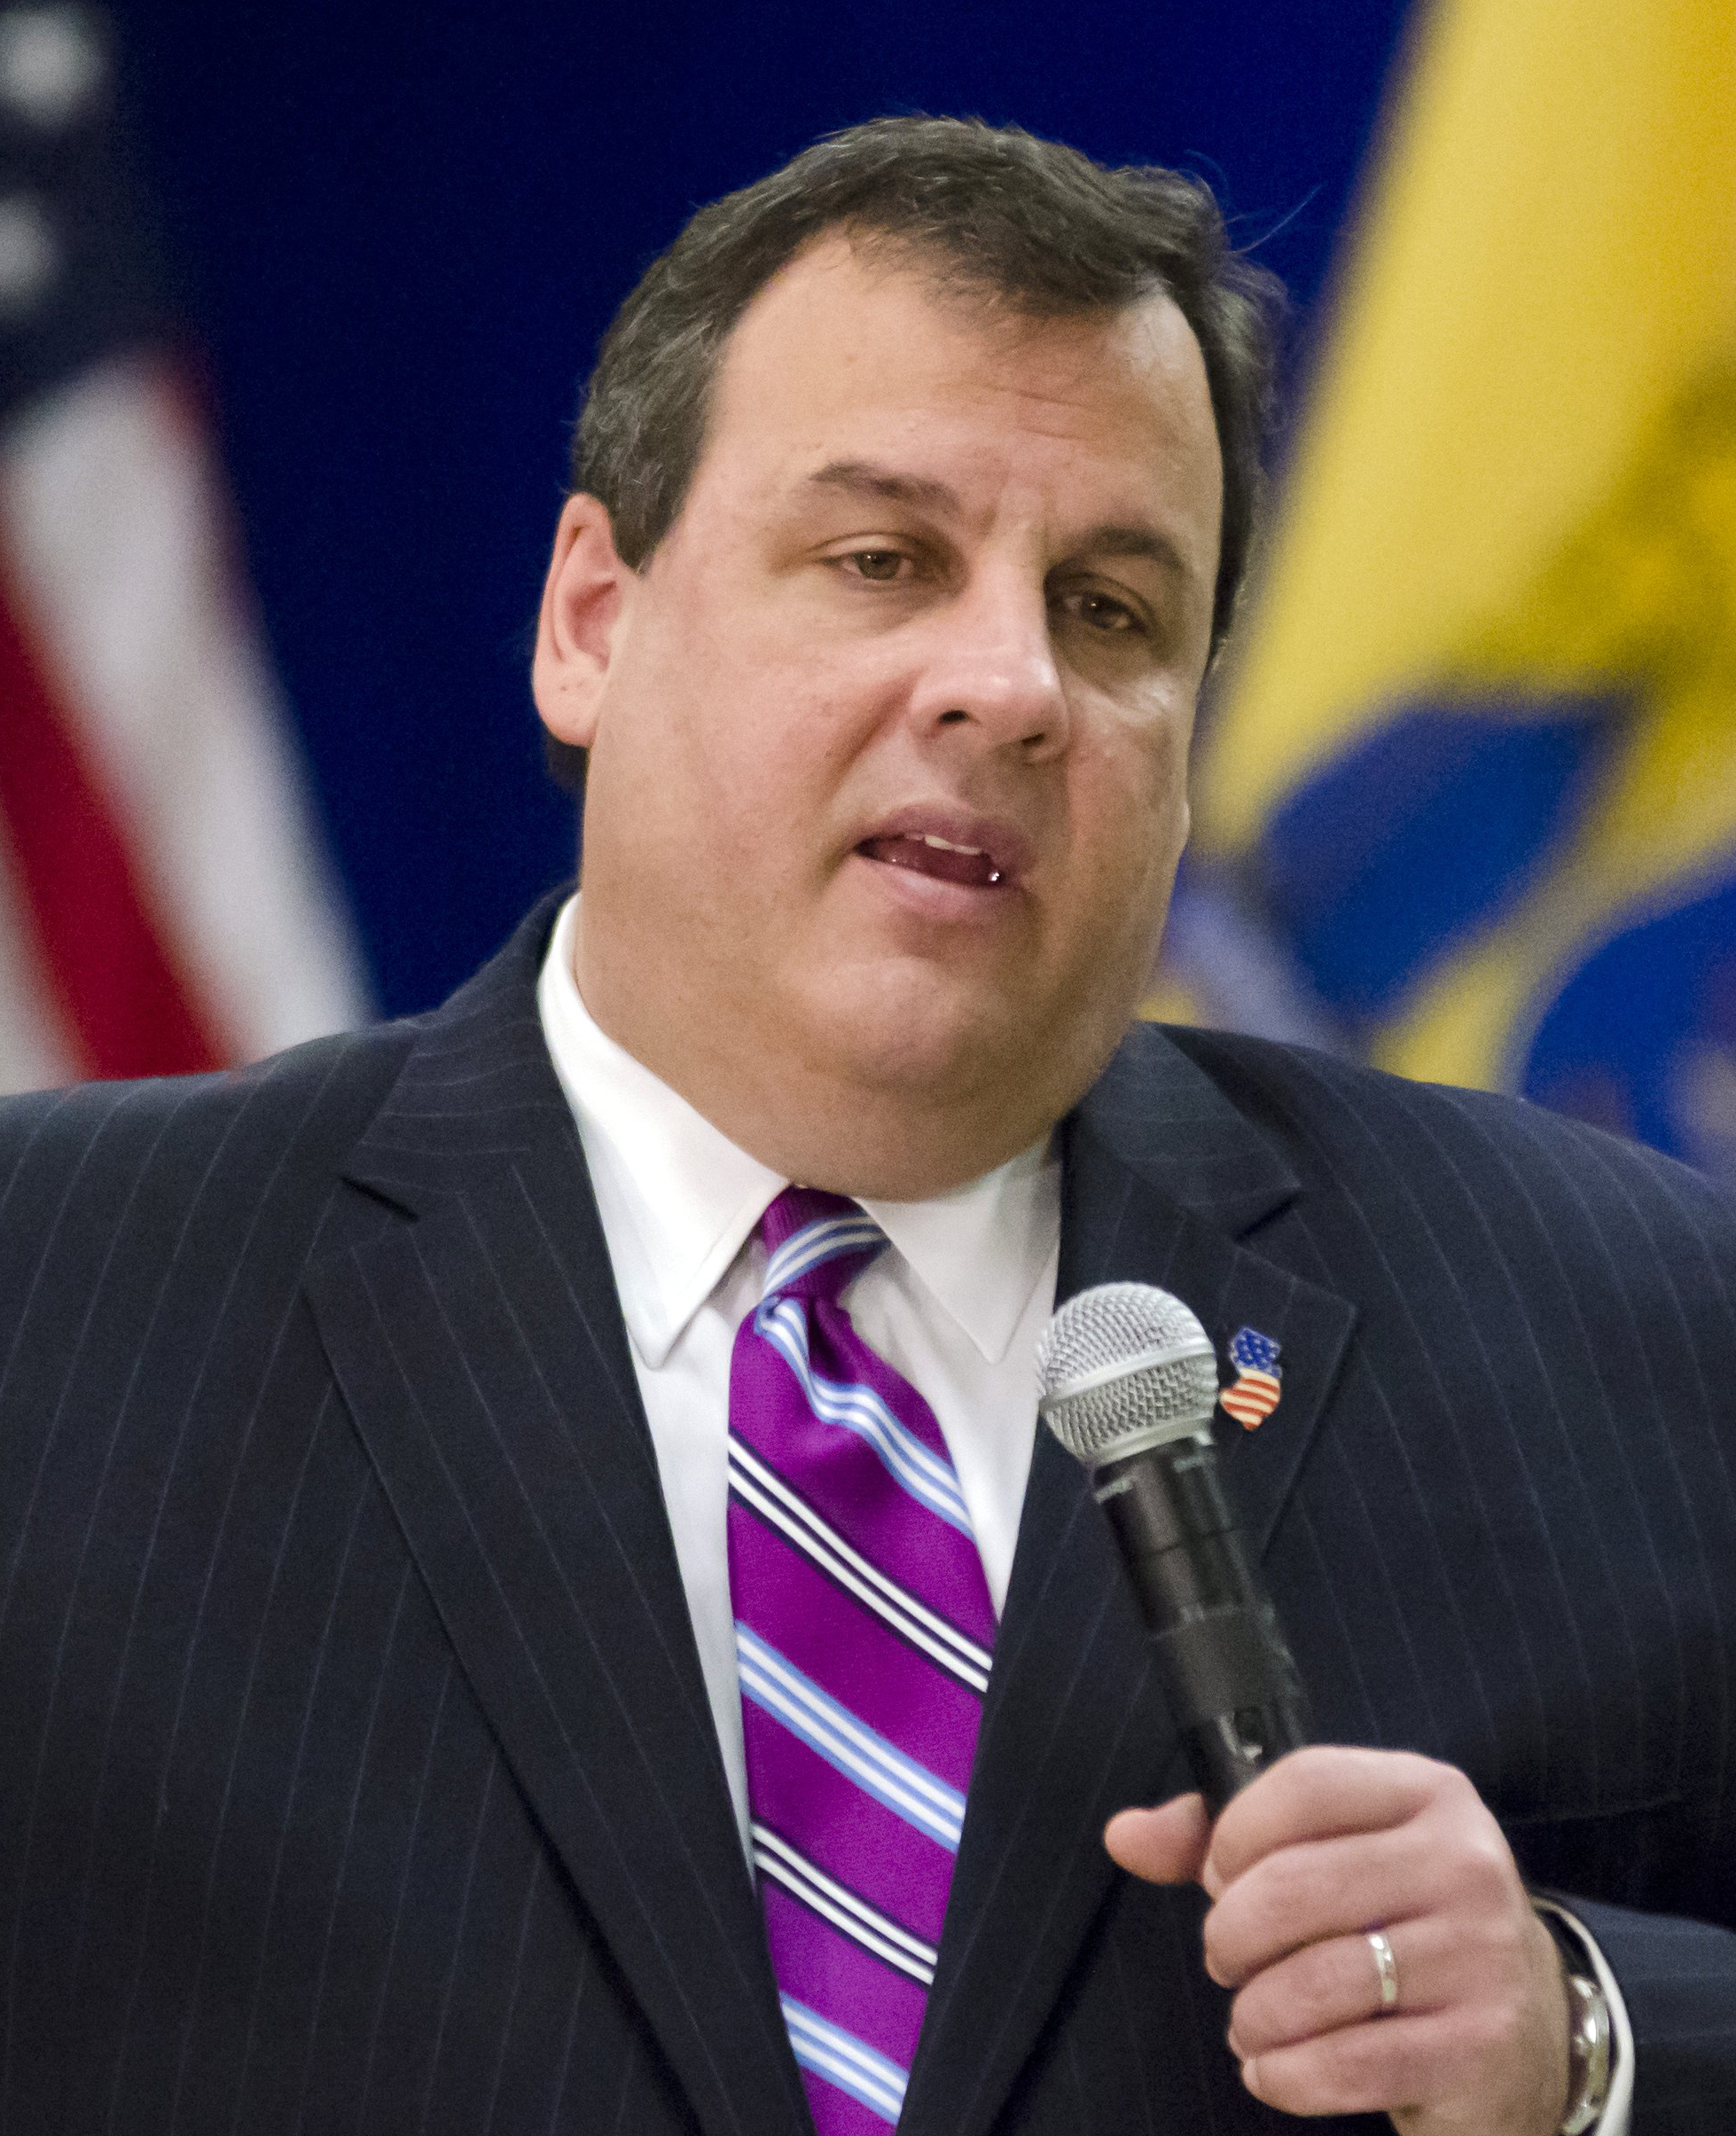 Reaction Roundup: Christie Draws Flack for Pension Put-Off